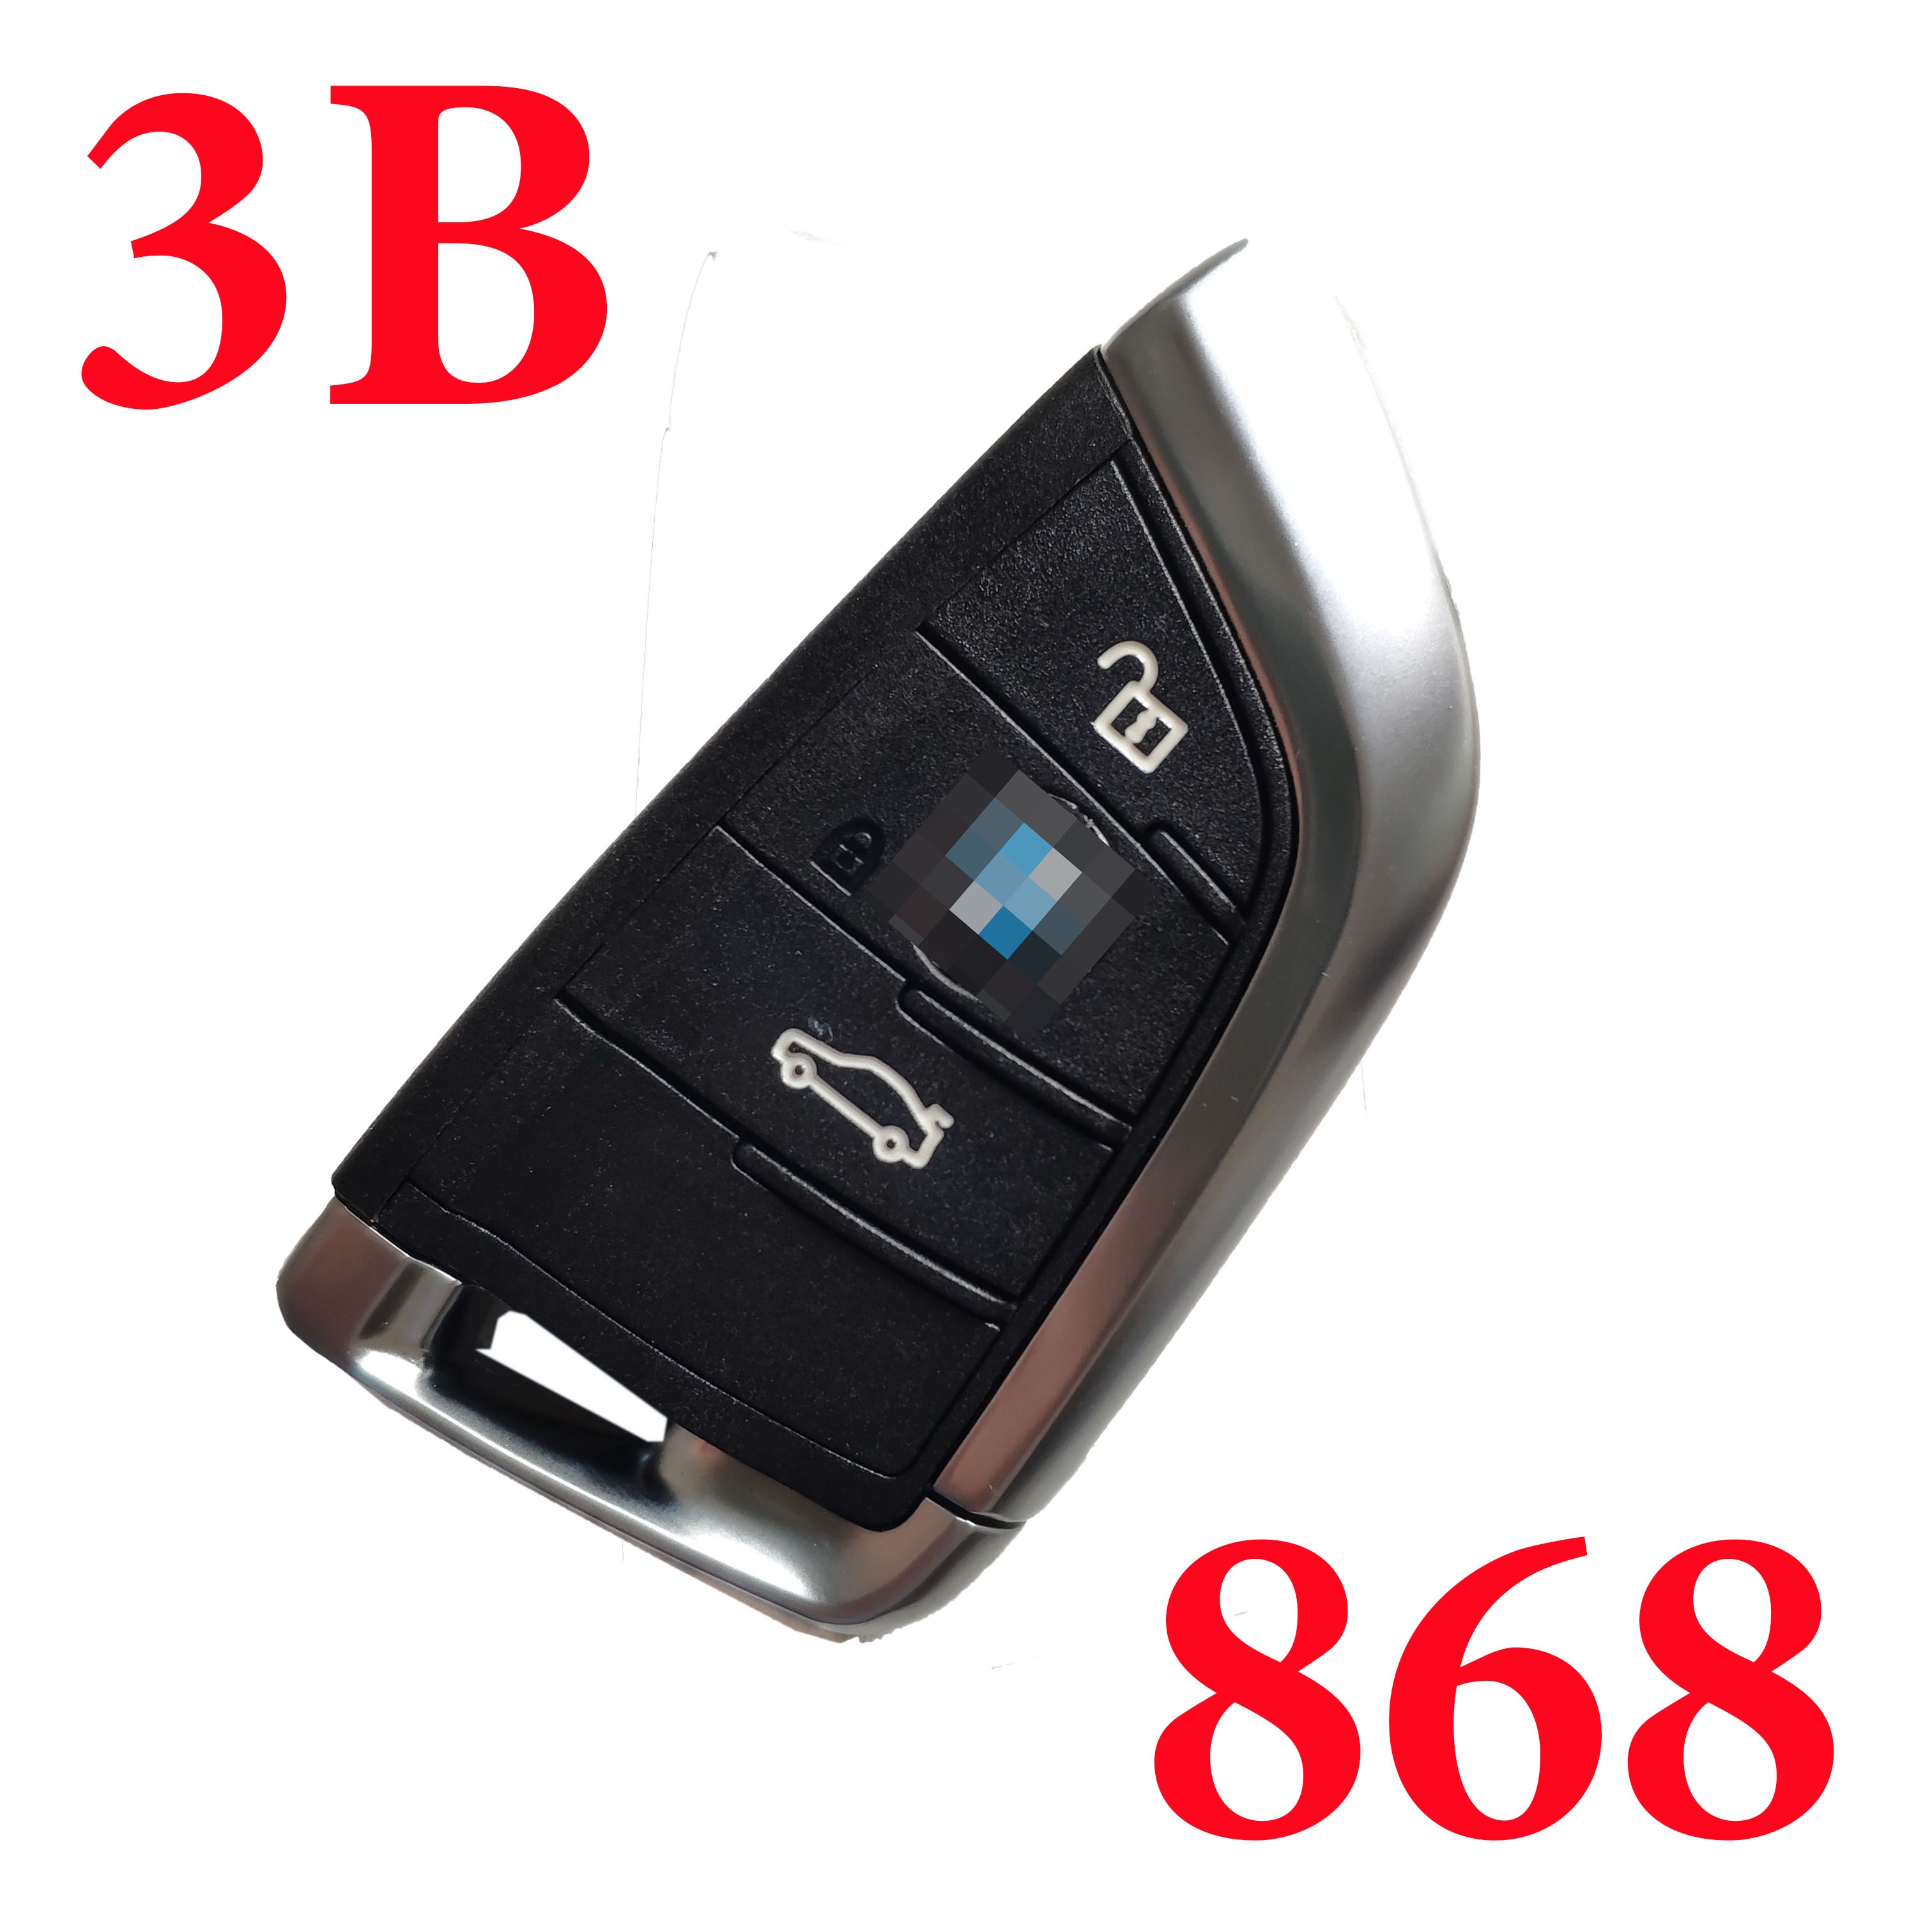 3 Buttons 868 MHz Smart Proximity Key for BMW FEM & F Series Cars